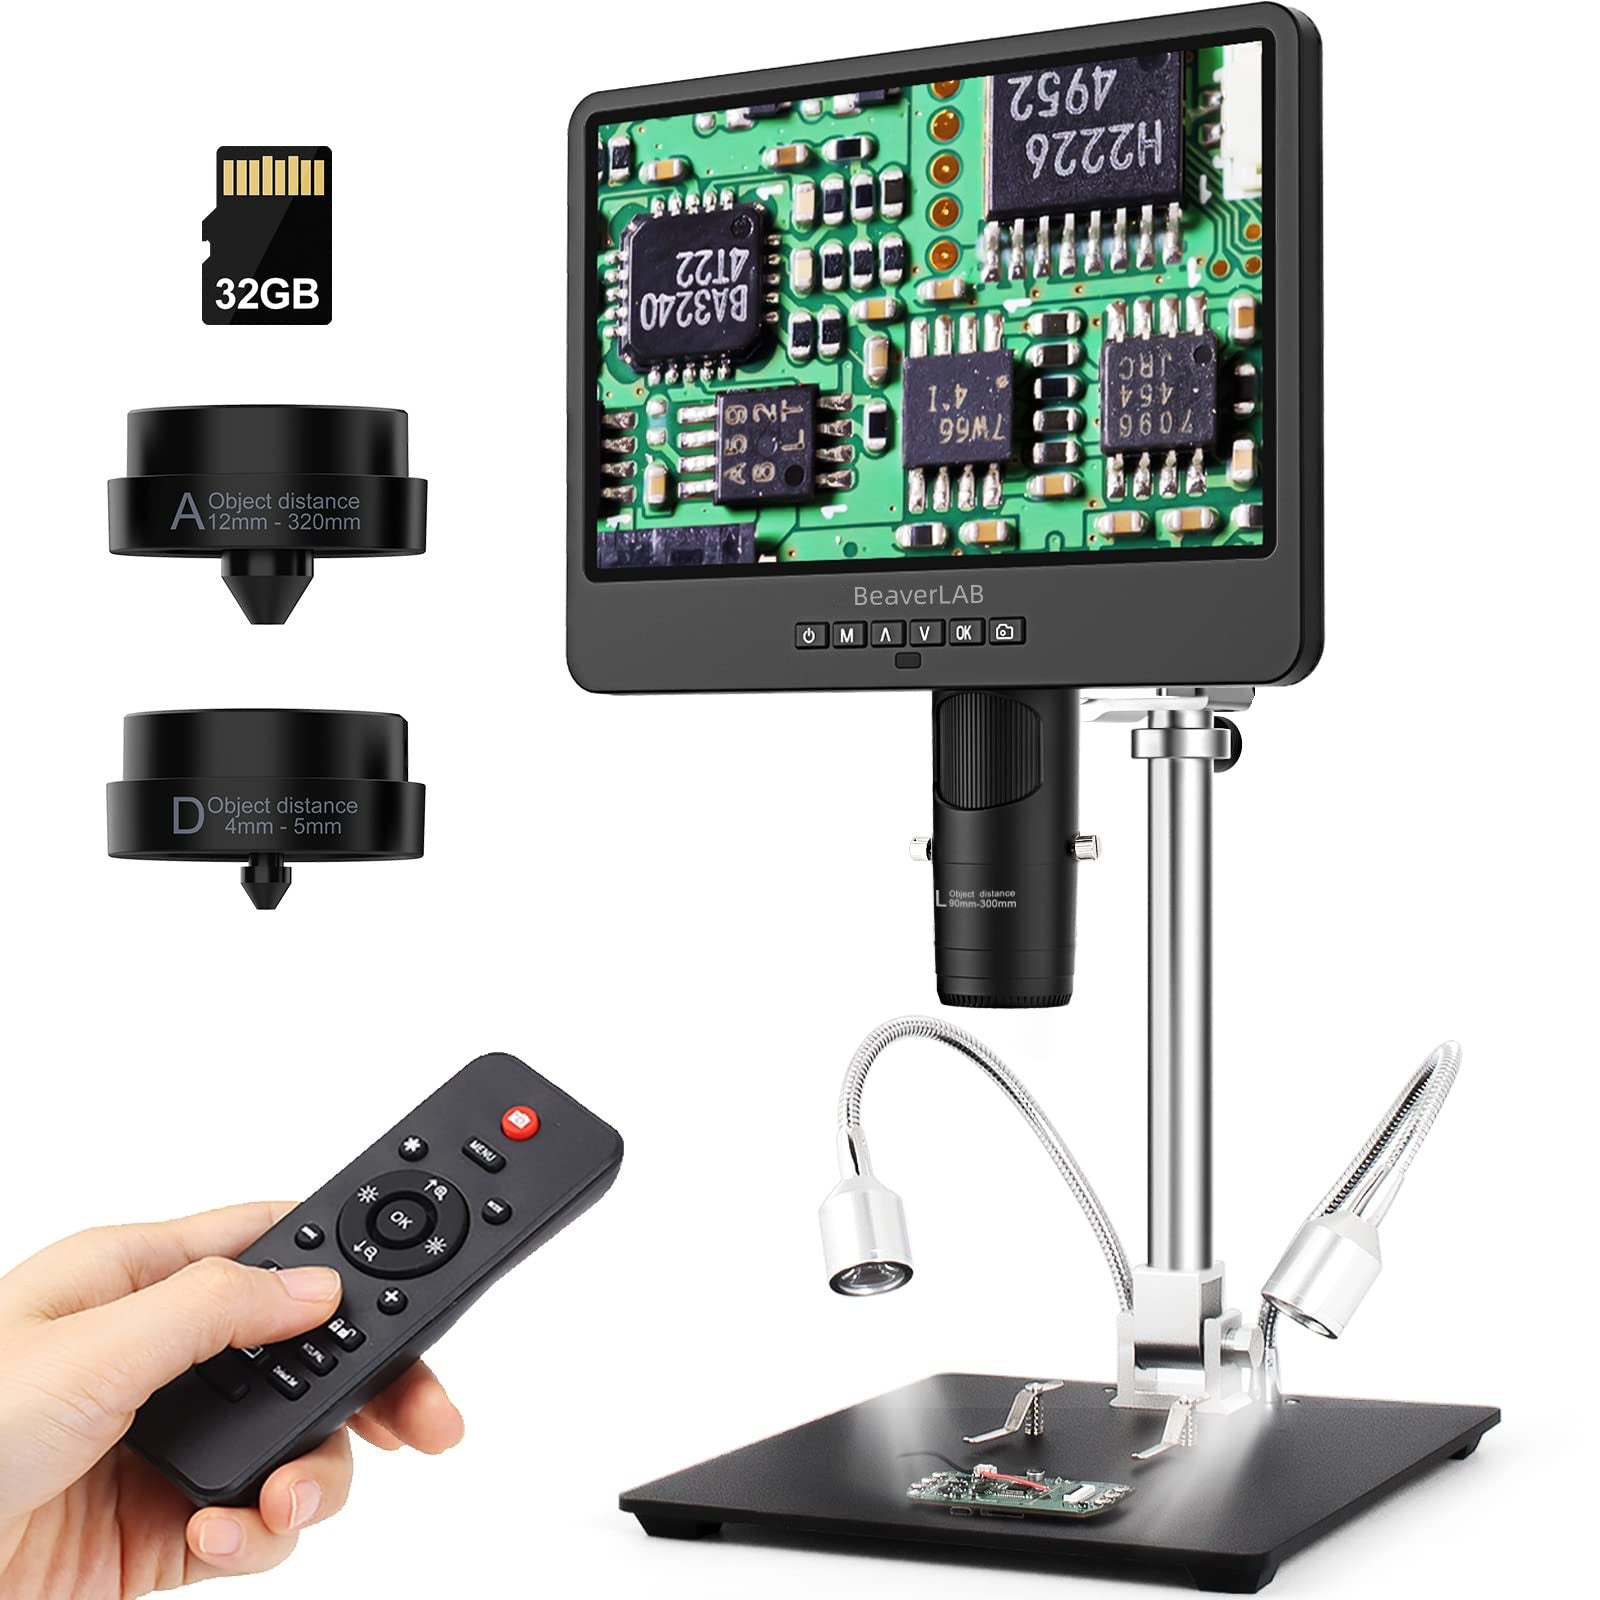 10.1 Inch HDMI Digital Microscope 2000x for Adults, 3 Lens 2160P UHD Video Record, Soldering Microscope, Coin Microscope, Biological Microscope Kit with 32G Card, Windows Compatible